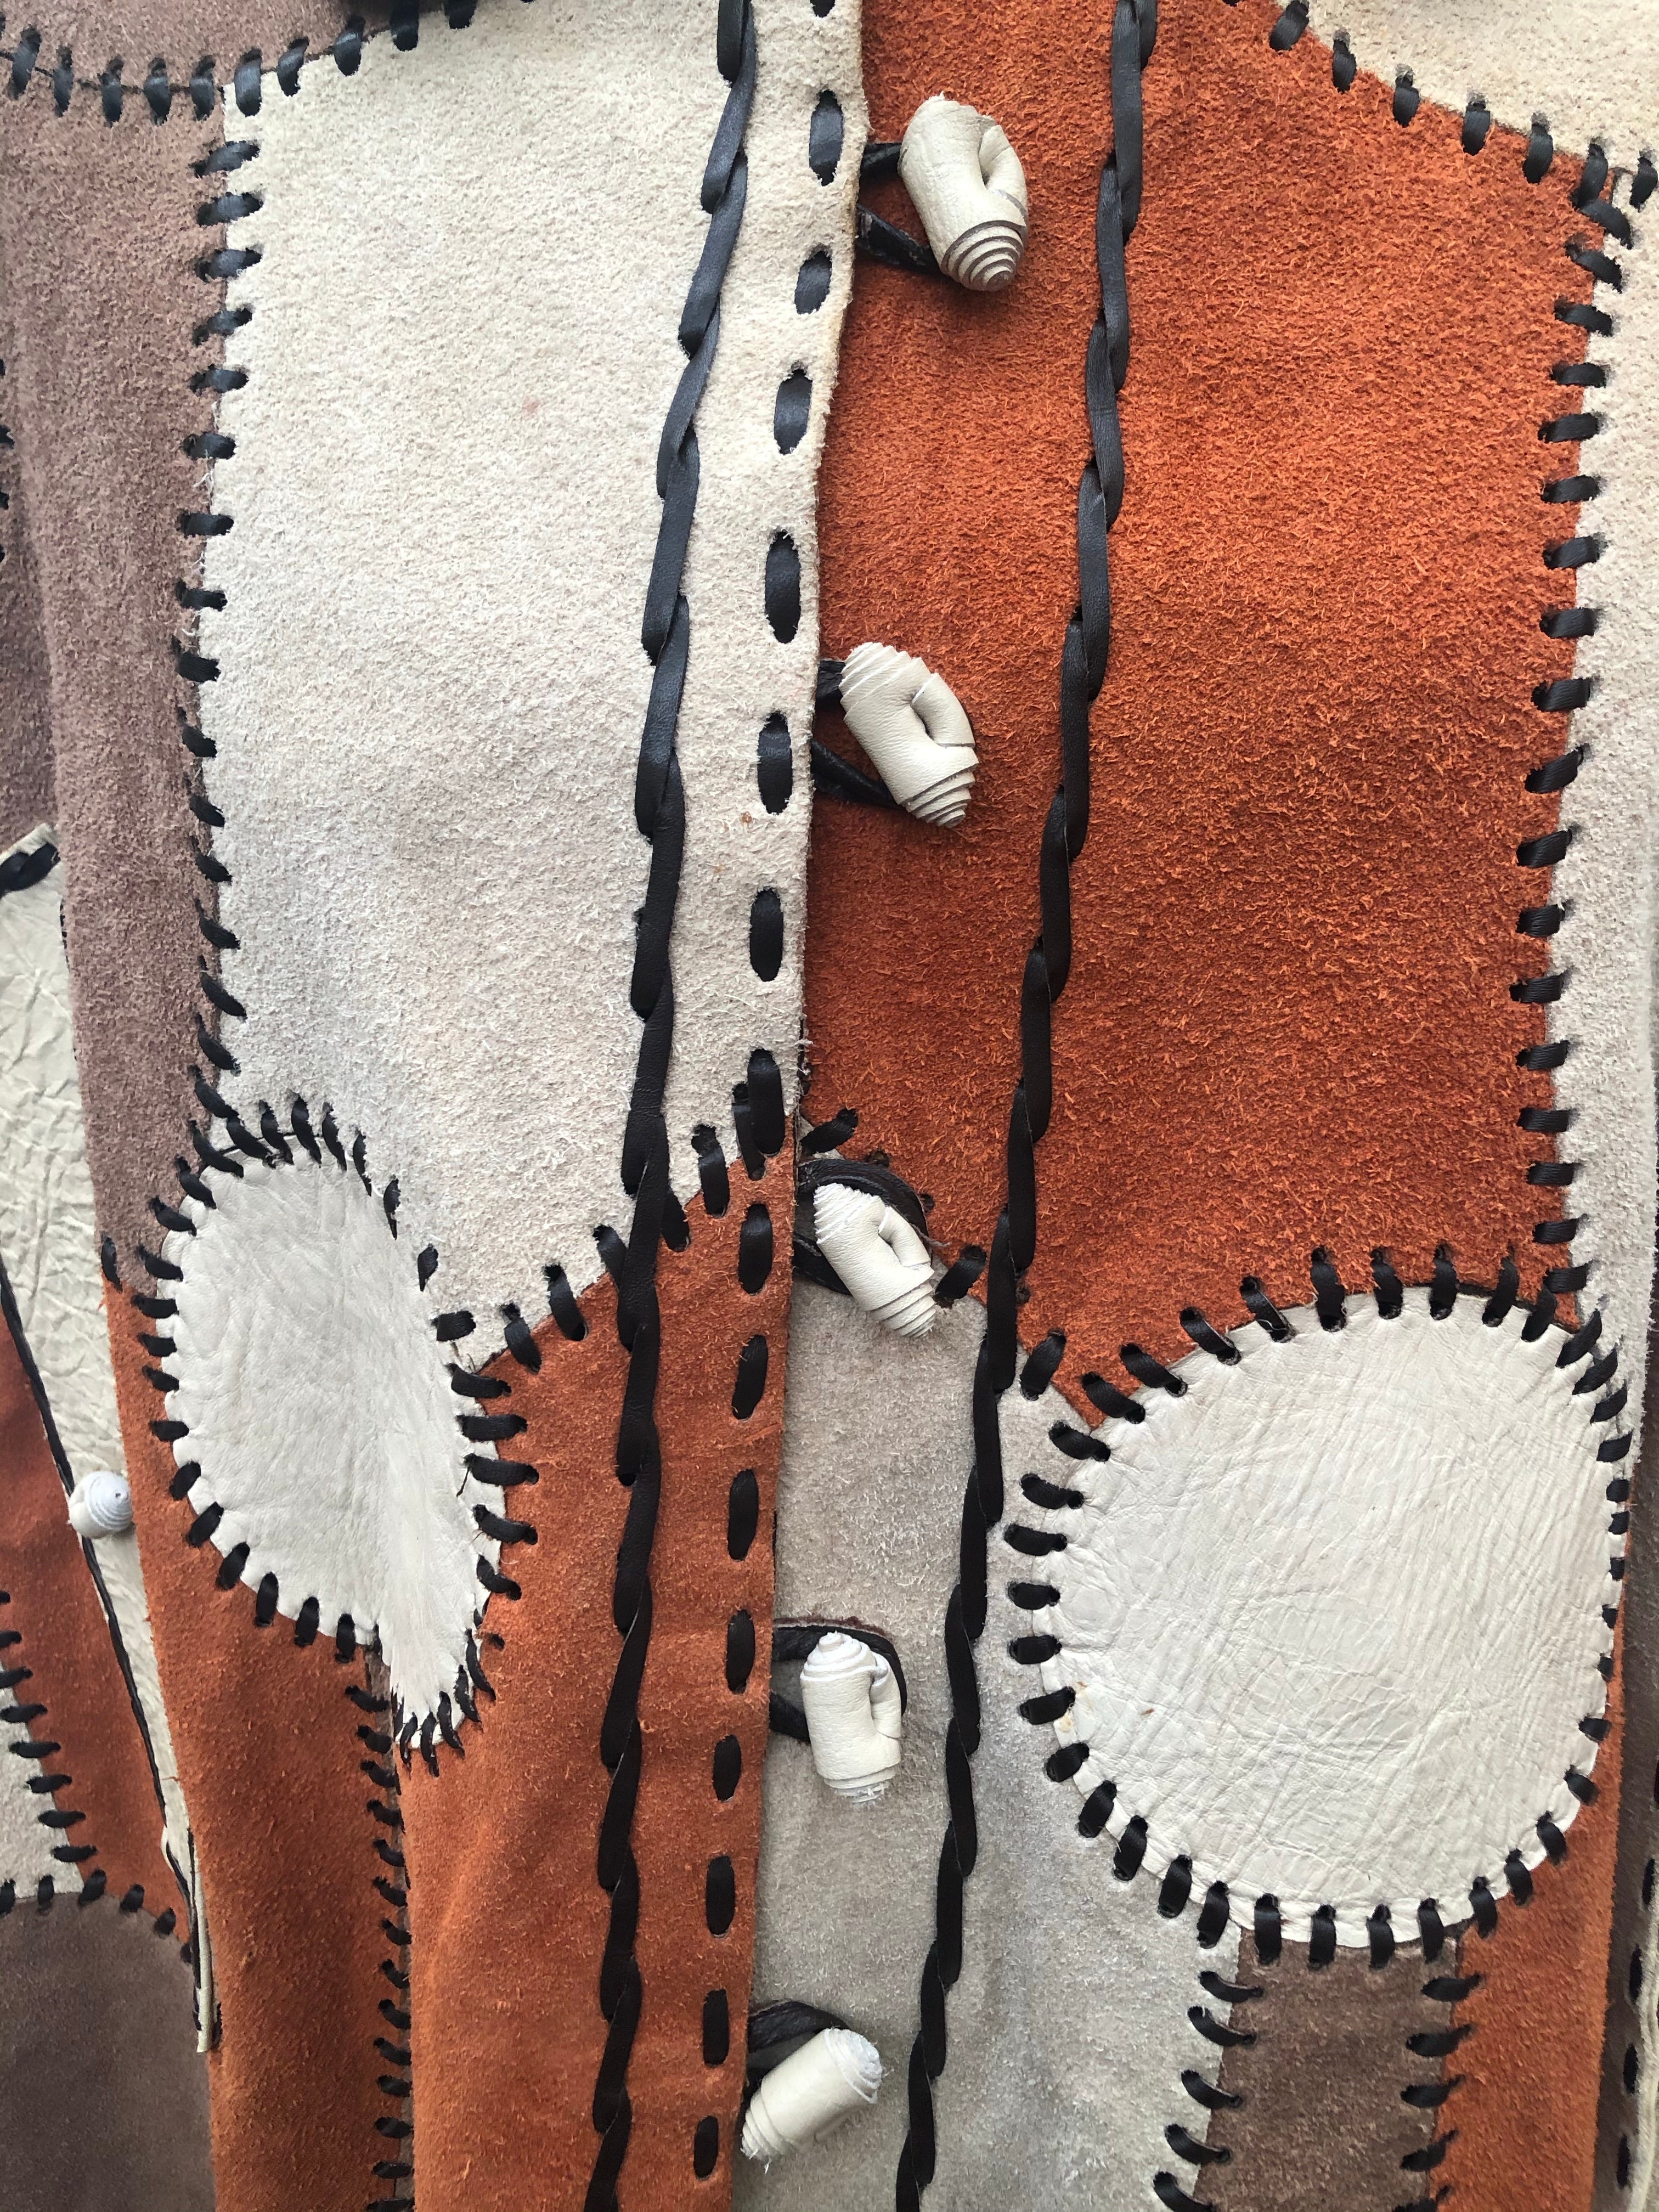 womens  western  vintage  S  poncho  penny collar  patchwork  navajo  Multi  leather  hooded  hippy  fringed  cream  coat  cape  brown  boho  bohemian  70s  60s  1970s  1960s urban village vintage